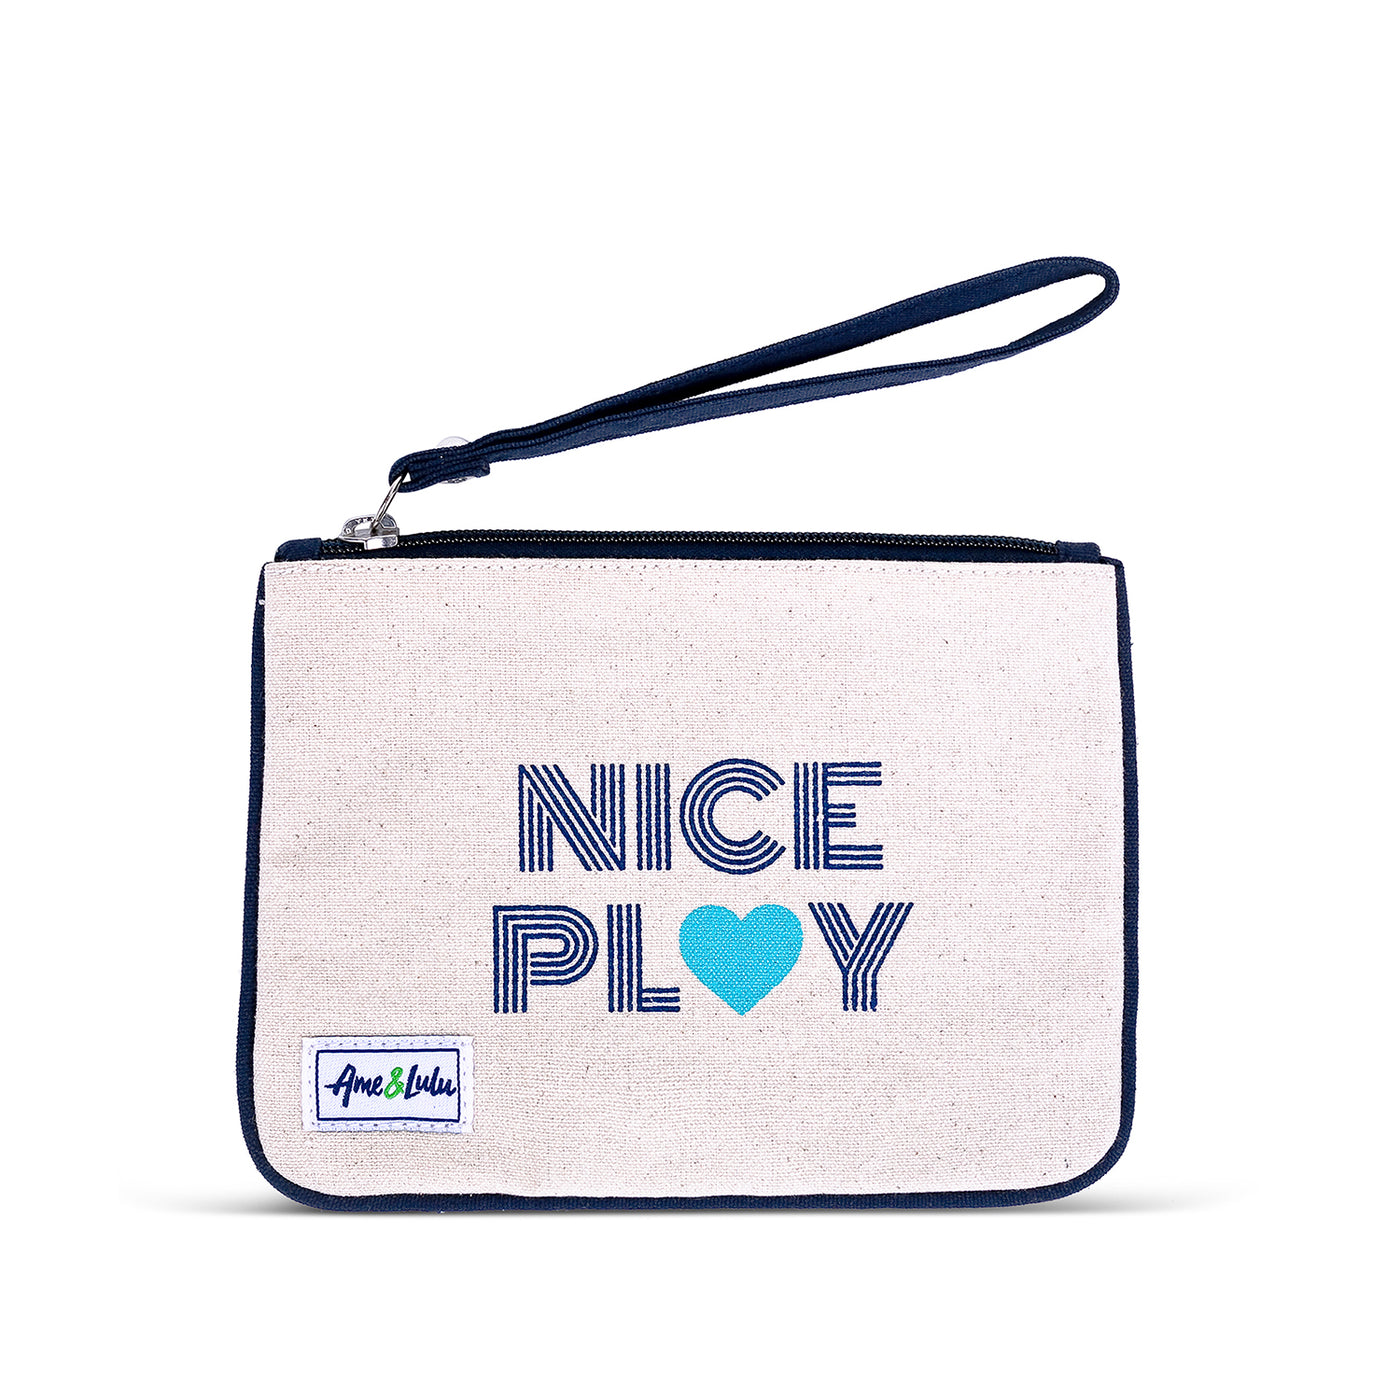 Small tan canvas wristlet with navy trim and strap. Front has the words "nice play" printed on the front in navy with a teal heart